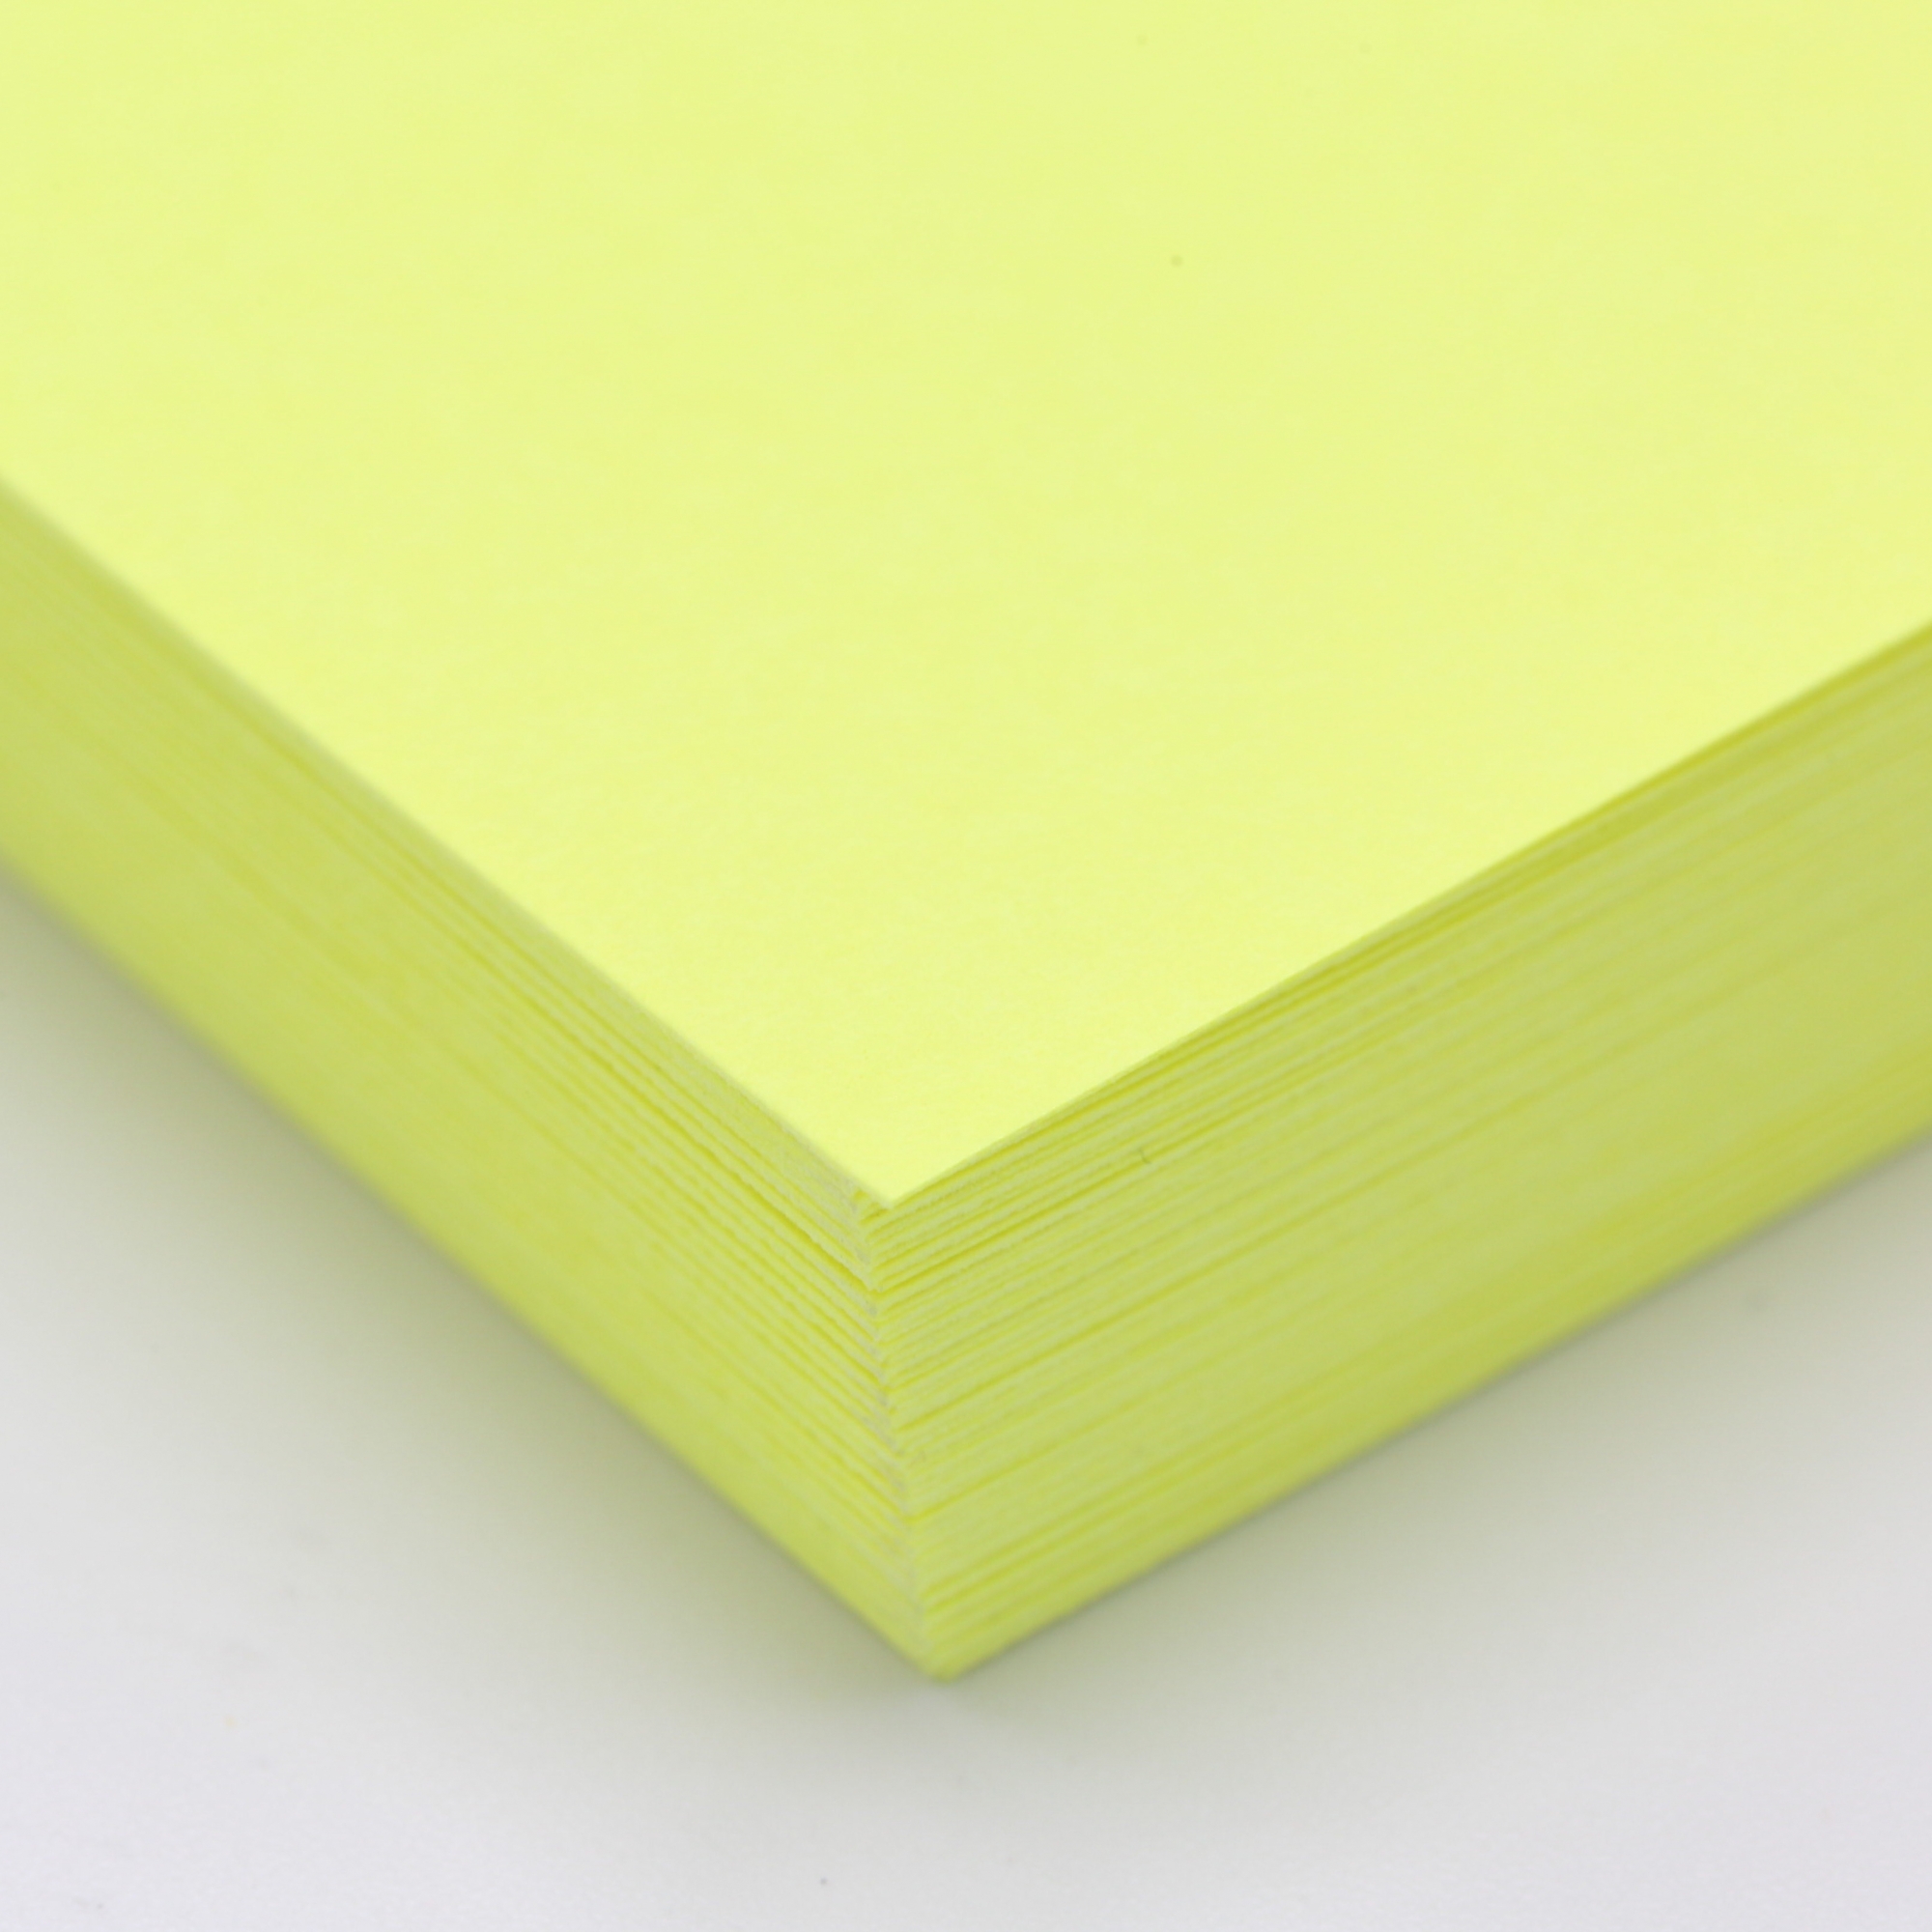 Astrobright Lift Off Lemon Yellow Card Stock for get noticed